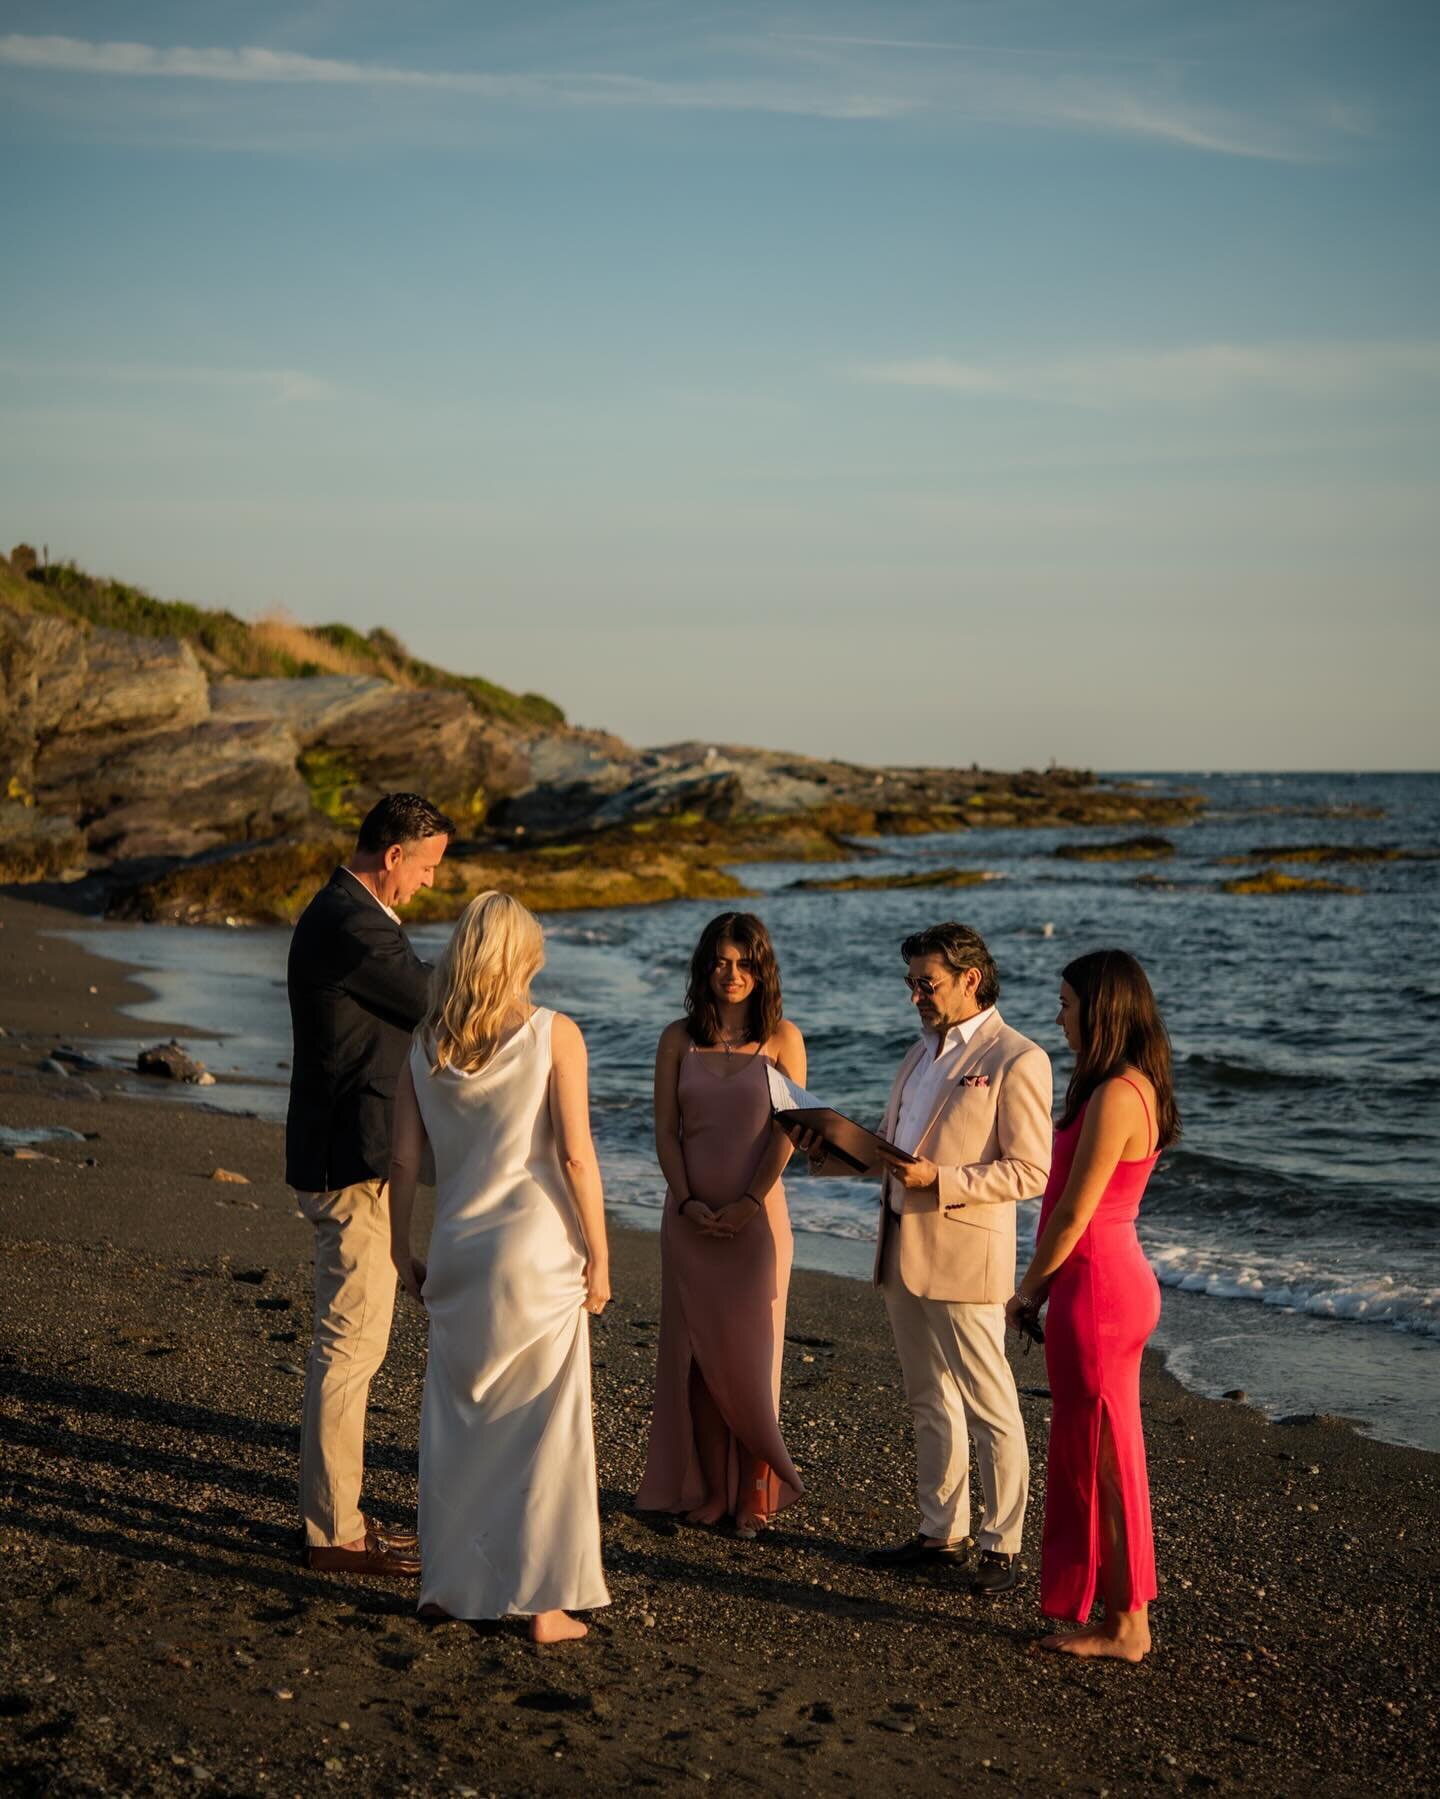 I had the honor of capturing these moments for this sweet couple last summer in a Secret ceremony by the sea, as they promised forever in the last light of the days warm sunshine, and it was full of so much love and happiness!
&bull;
#megheriot #megh